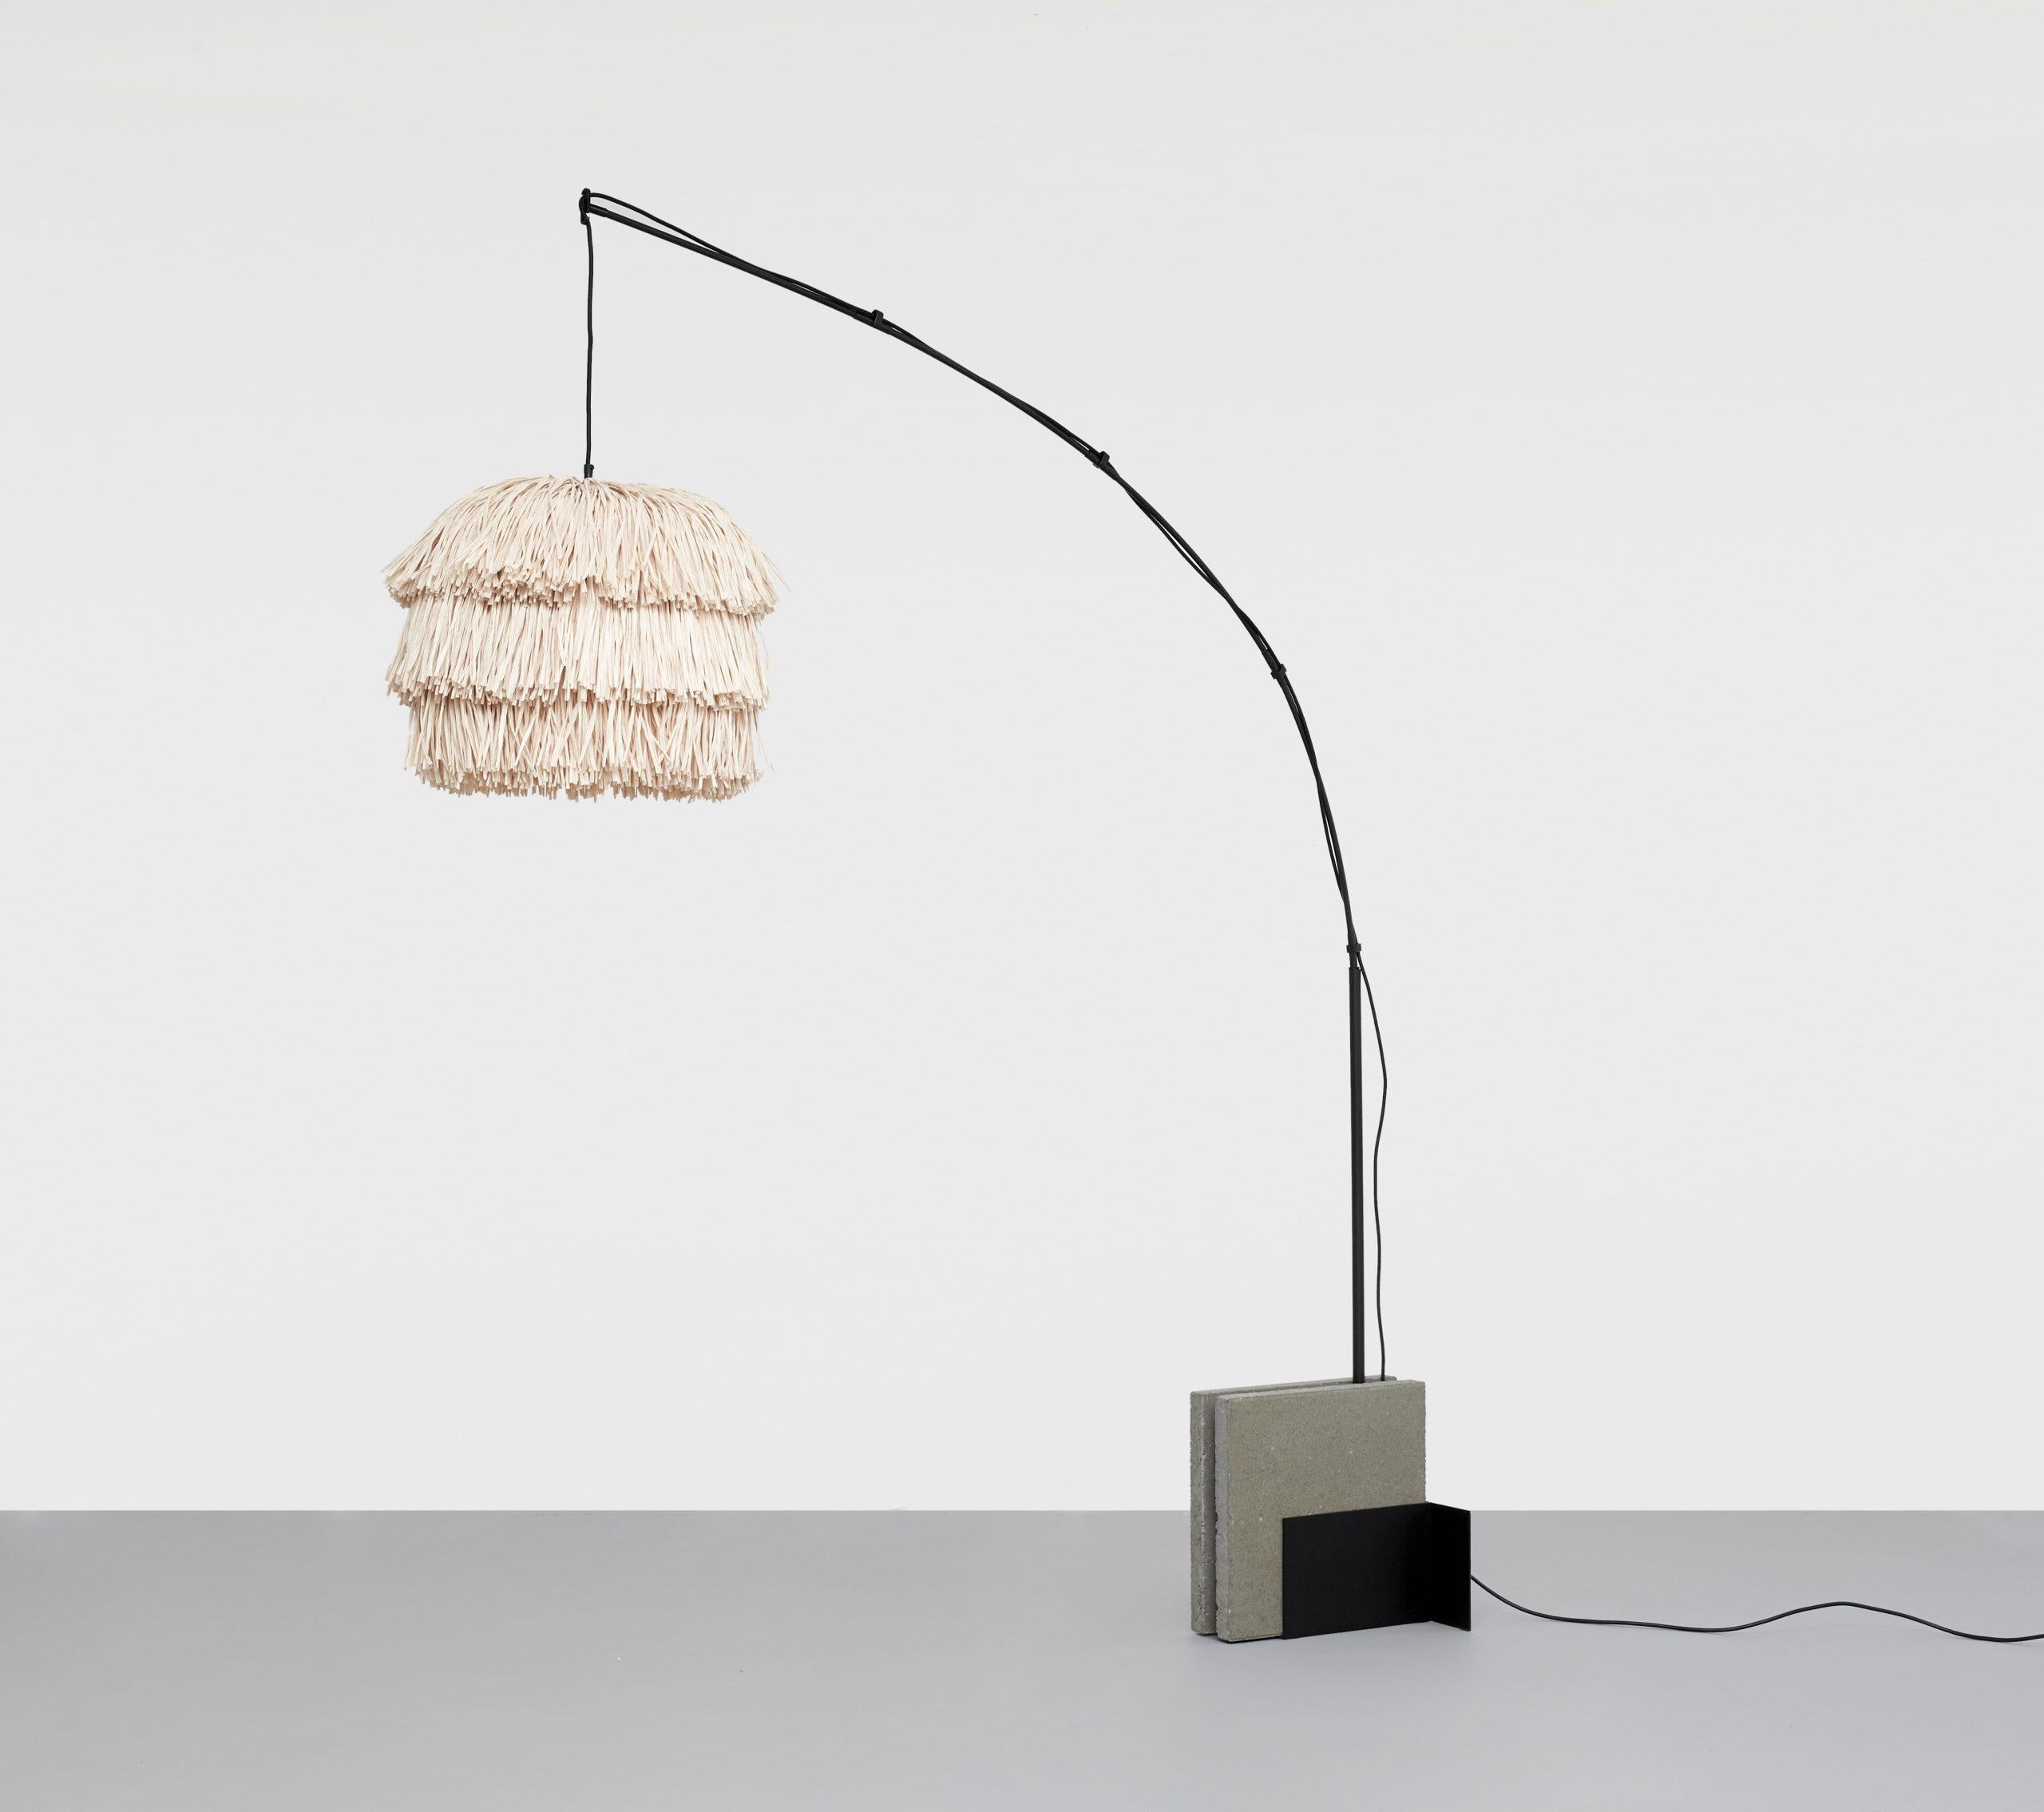 Beige Fran L stand floor lamp by Llot Llov
Handcrafted light object
Dimensions: D 50 x W 205.8 x H 250 cm
Materials: raffia fringes, glass fiber, steel, concrete
Colour: beige
Also available in green, coral, black.

Another member of the FRAN family